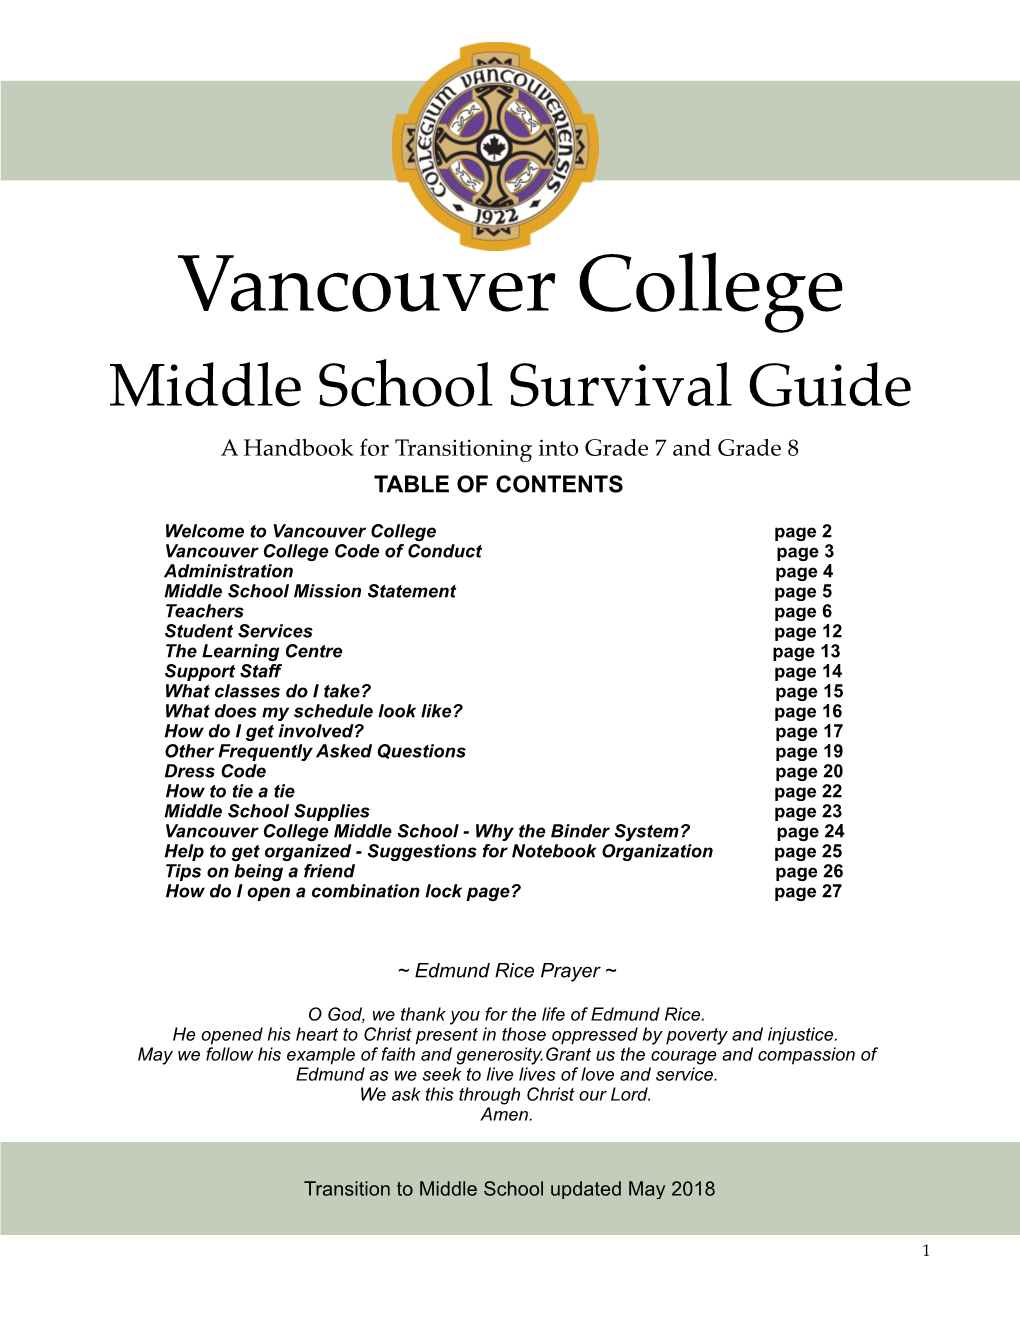 Middle School Manual Copy for 2018-2019